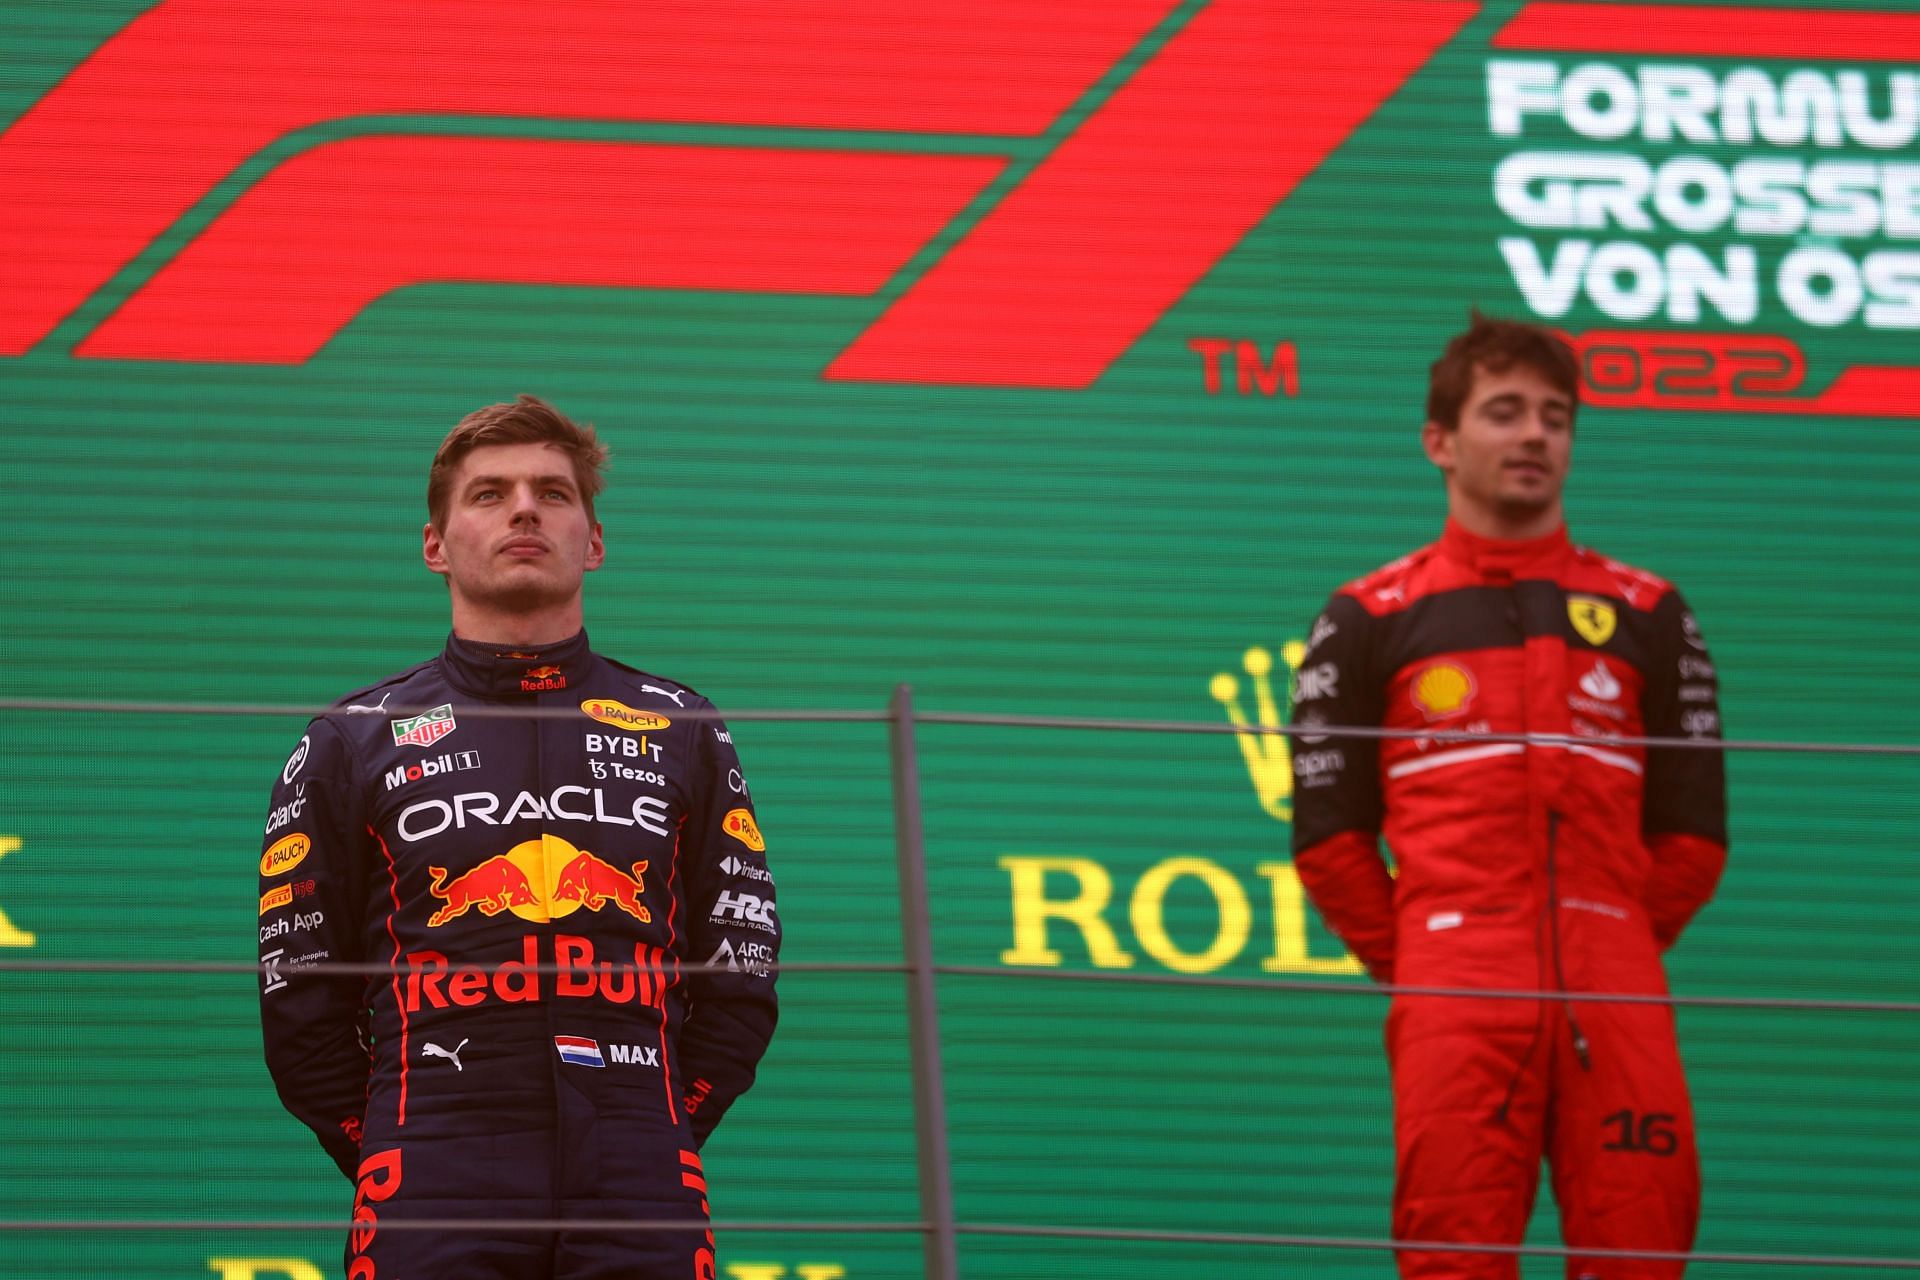 Leclerc and Verstappen are the two leading championship protagonists this season.